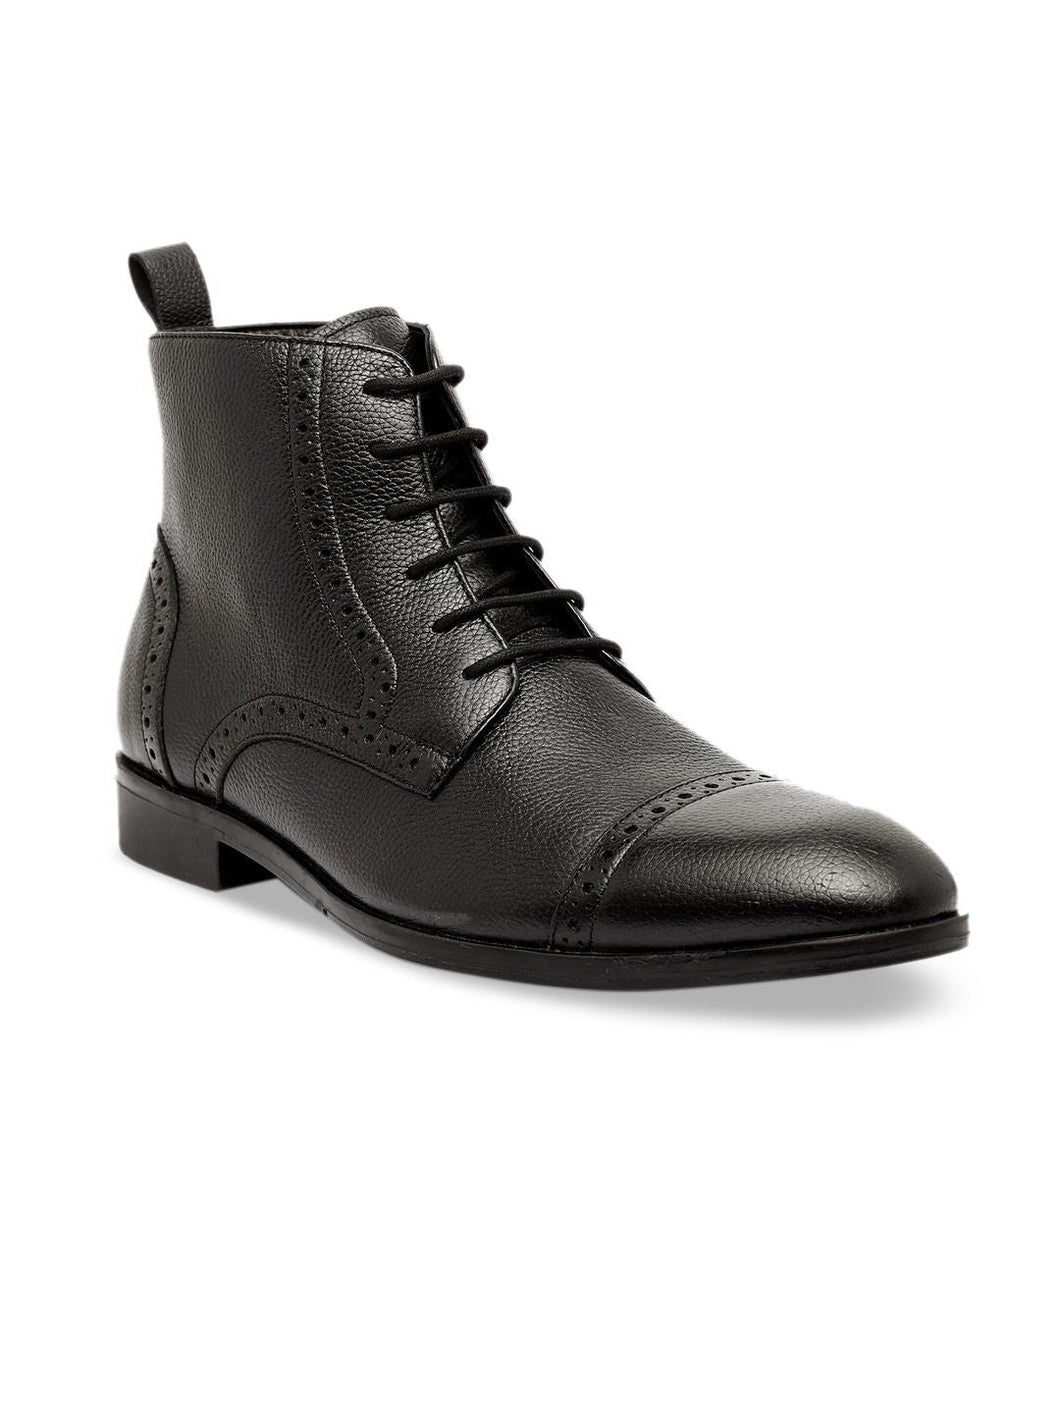 Men Black Solid Leather Round Toe Mid-Top Flat Boots